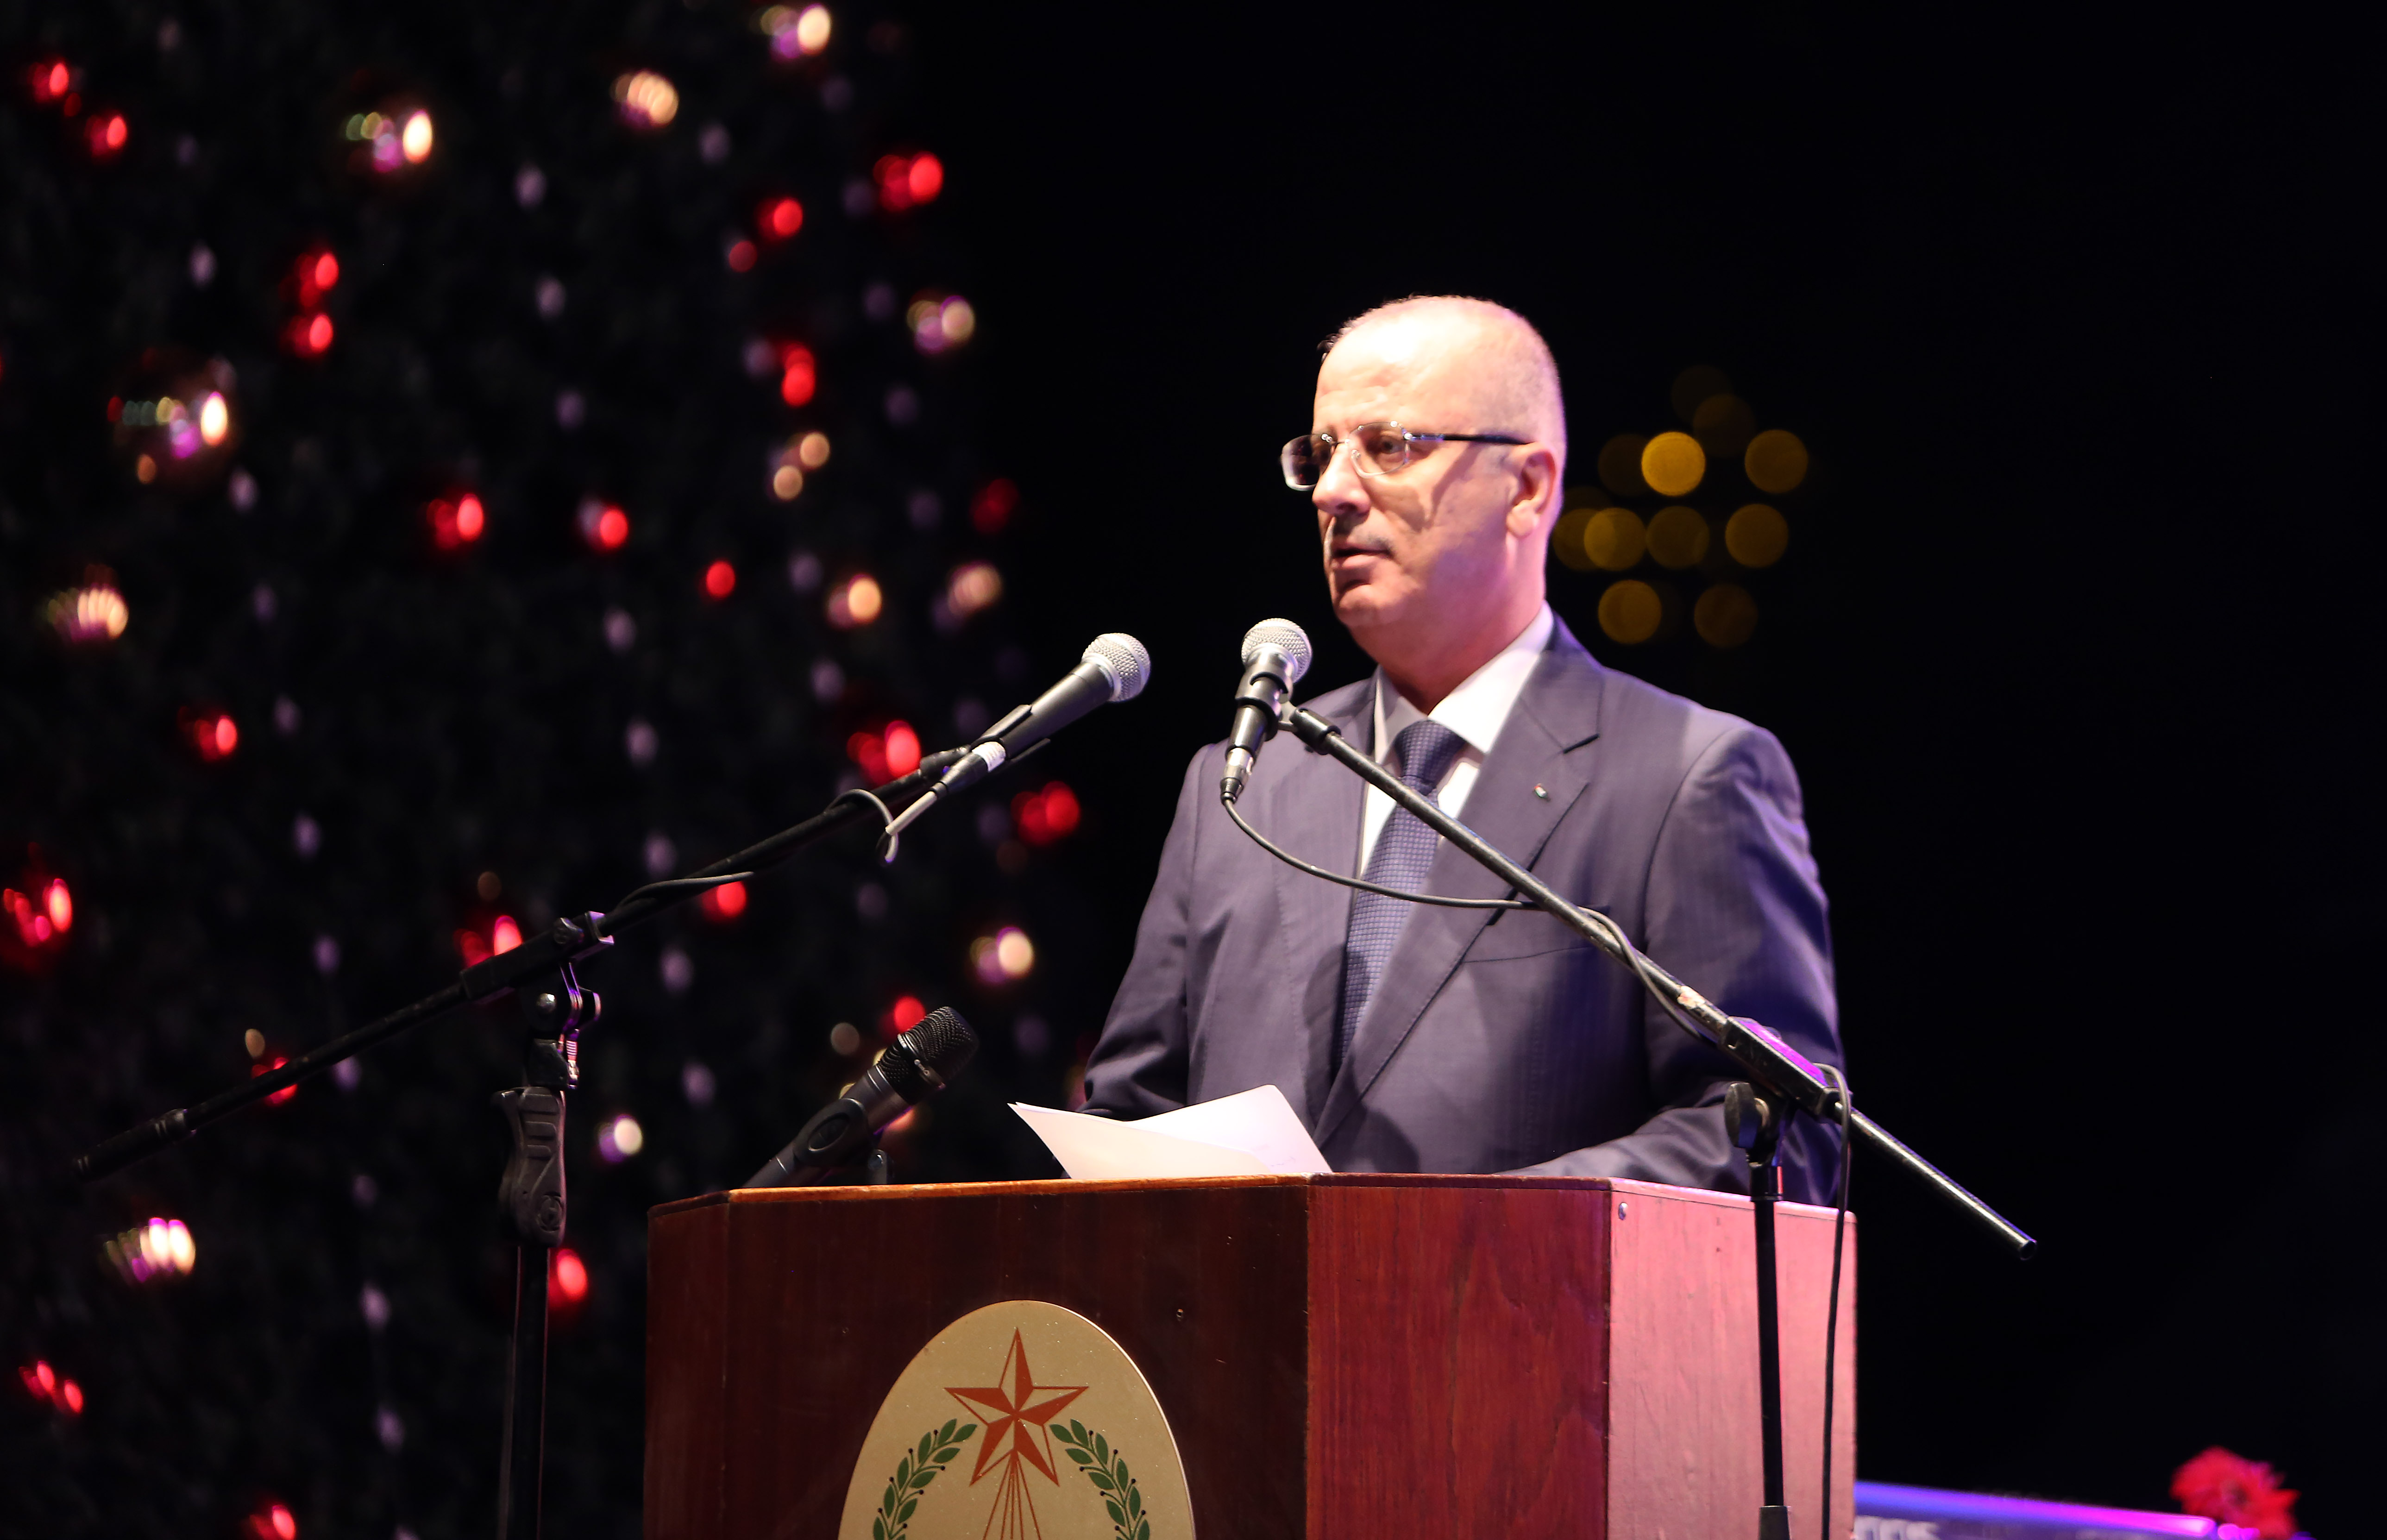 Palestinian Prime Minister Rami Hamdallah during a Christmas tree lighting ceremony outside the Church of the Nativity in the West Bank town of Bethlehem